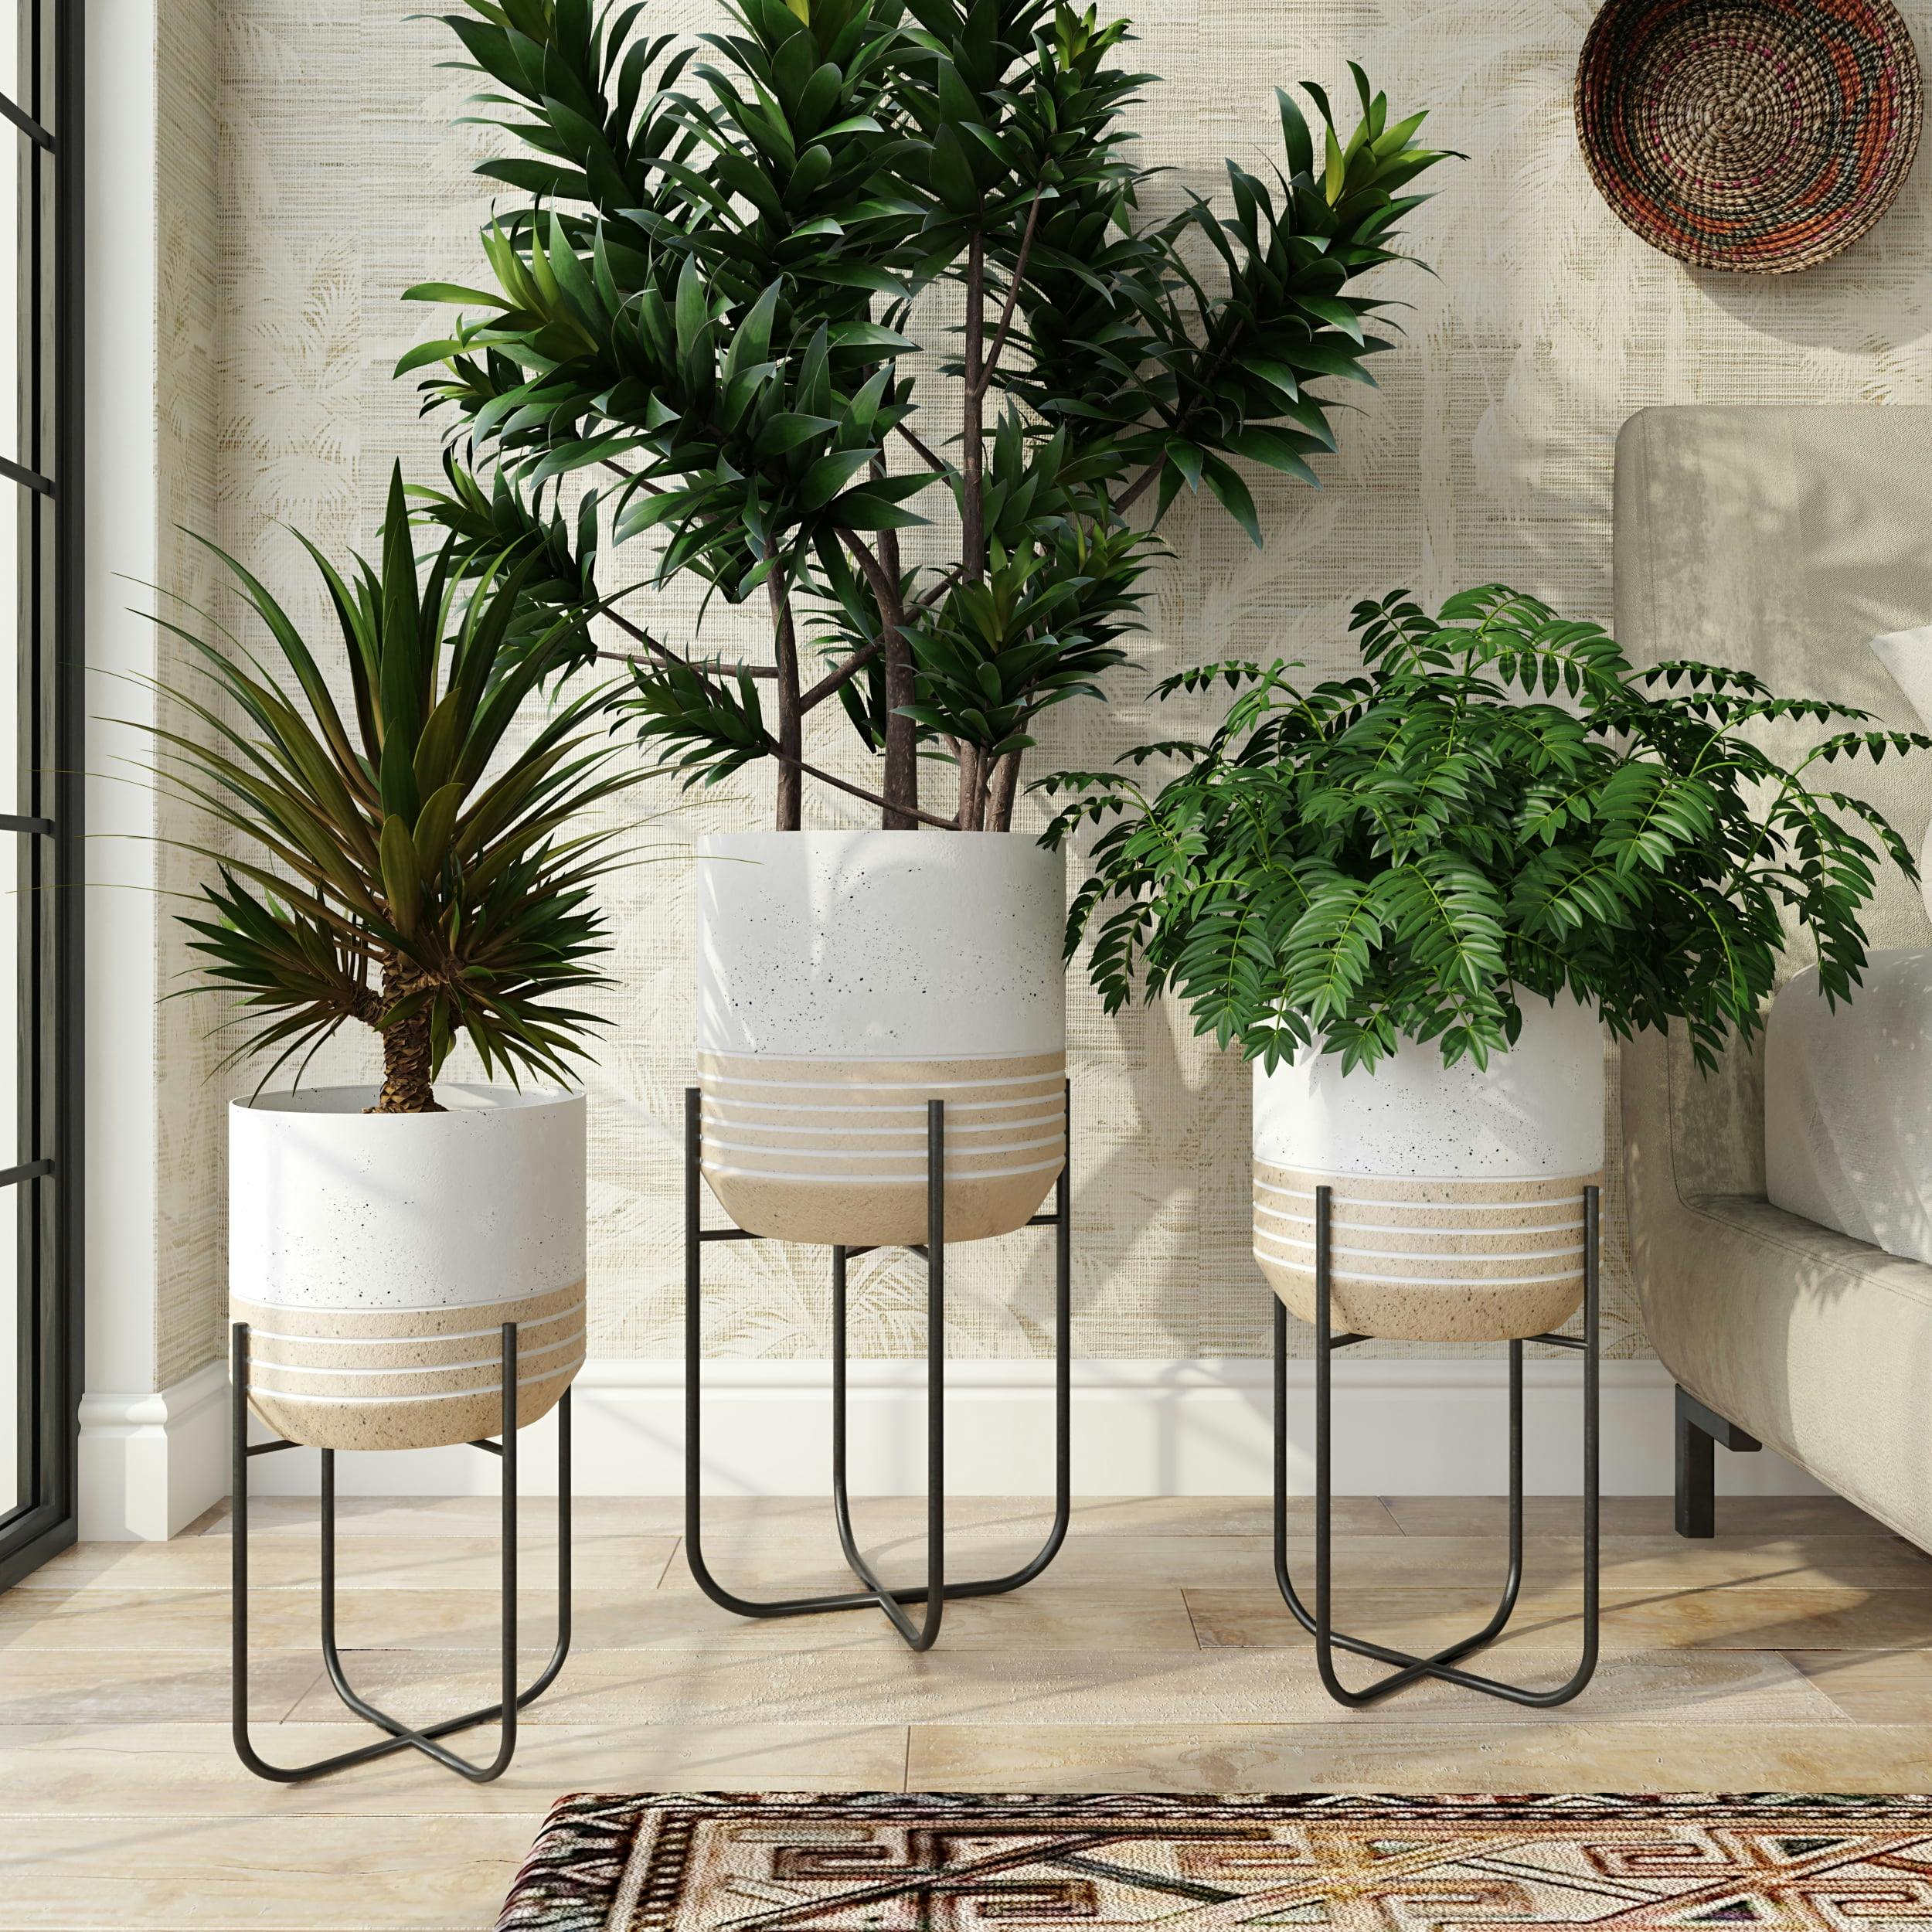 Bodhi Textured Off-White and Tan Metal Planters with Matte Black Legs - Set of 3